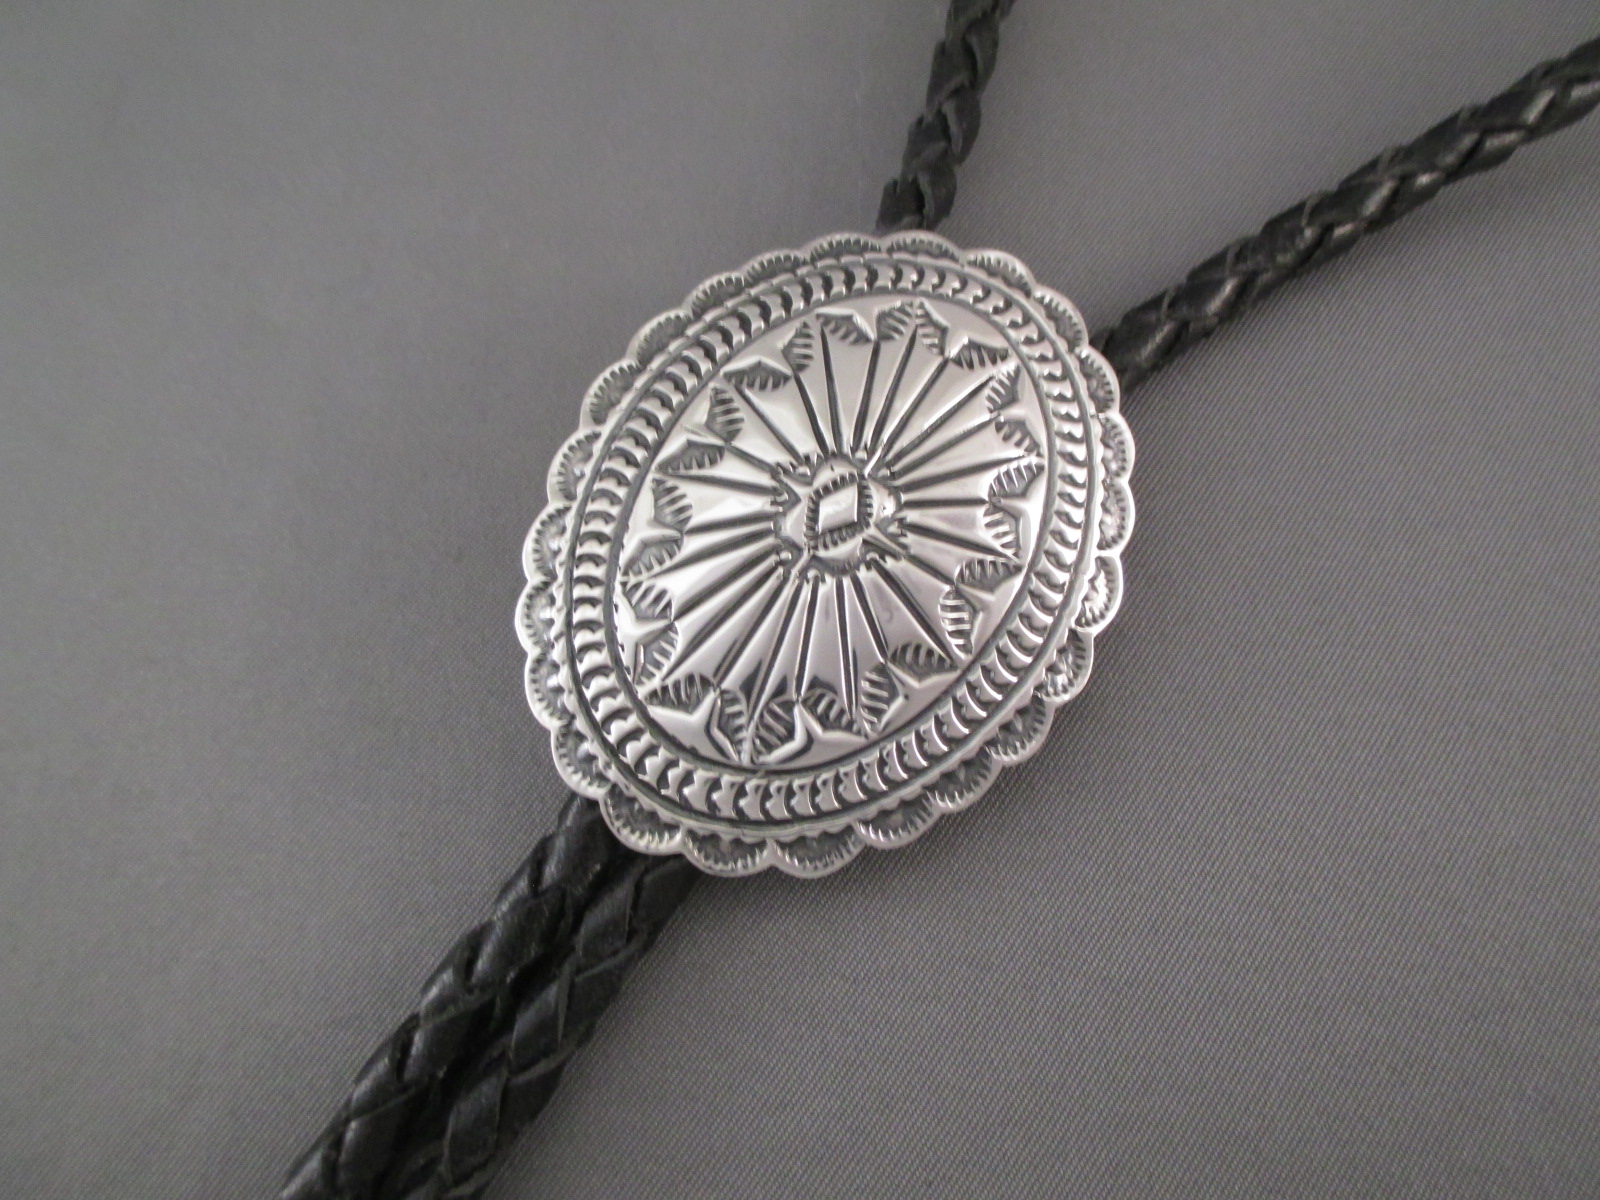 Native American Jewelry - Sterling Silver Bolo Tie by Navajo jeweler, Kevin Ramone FOR SALE $185-